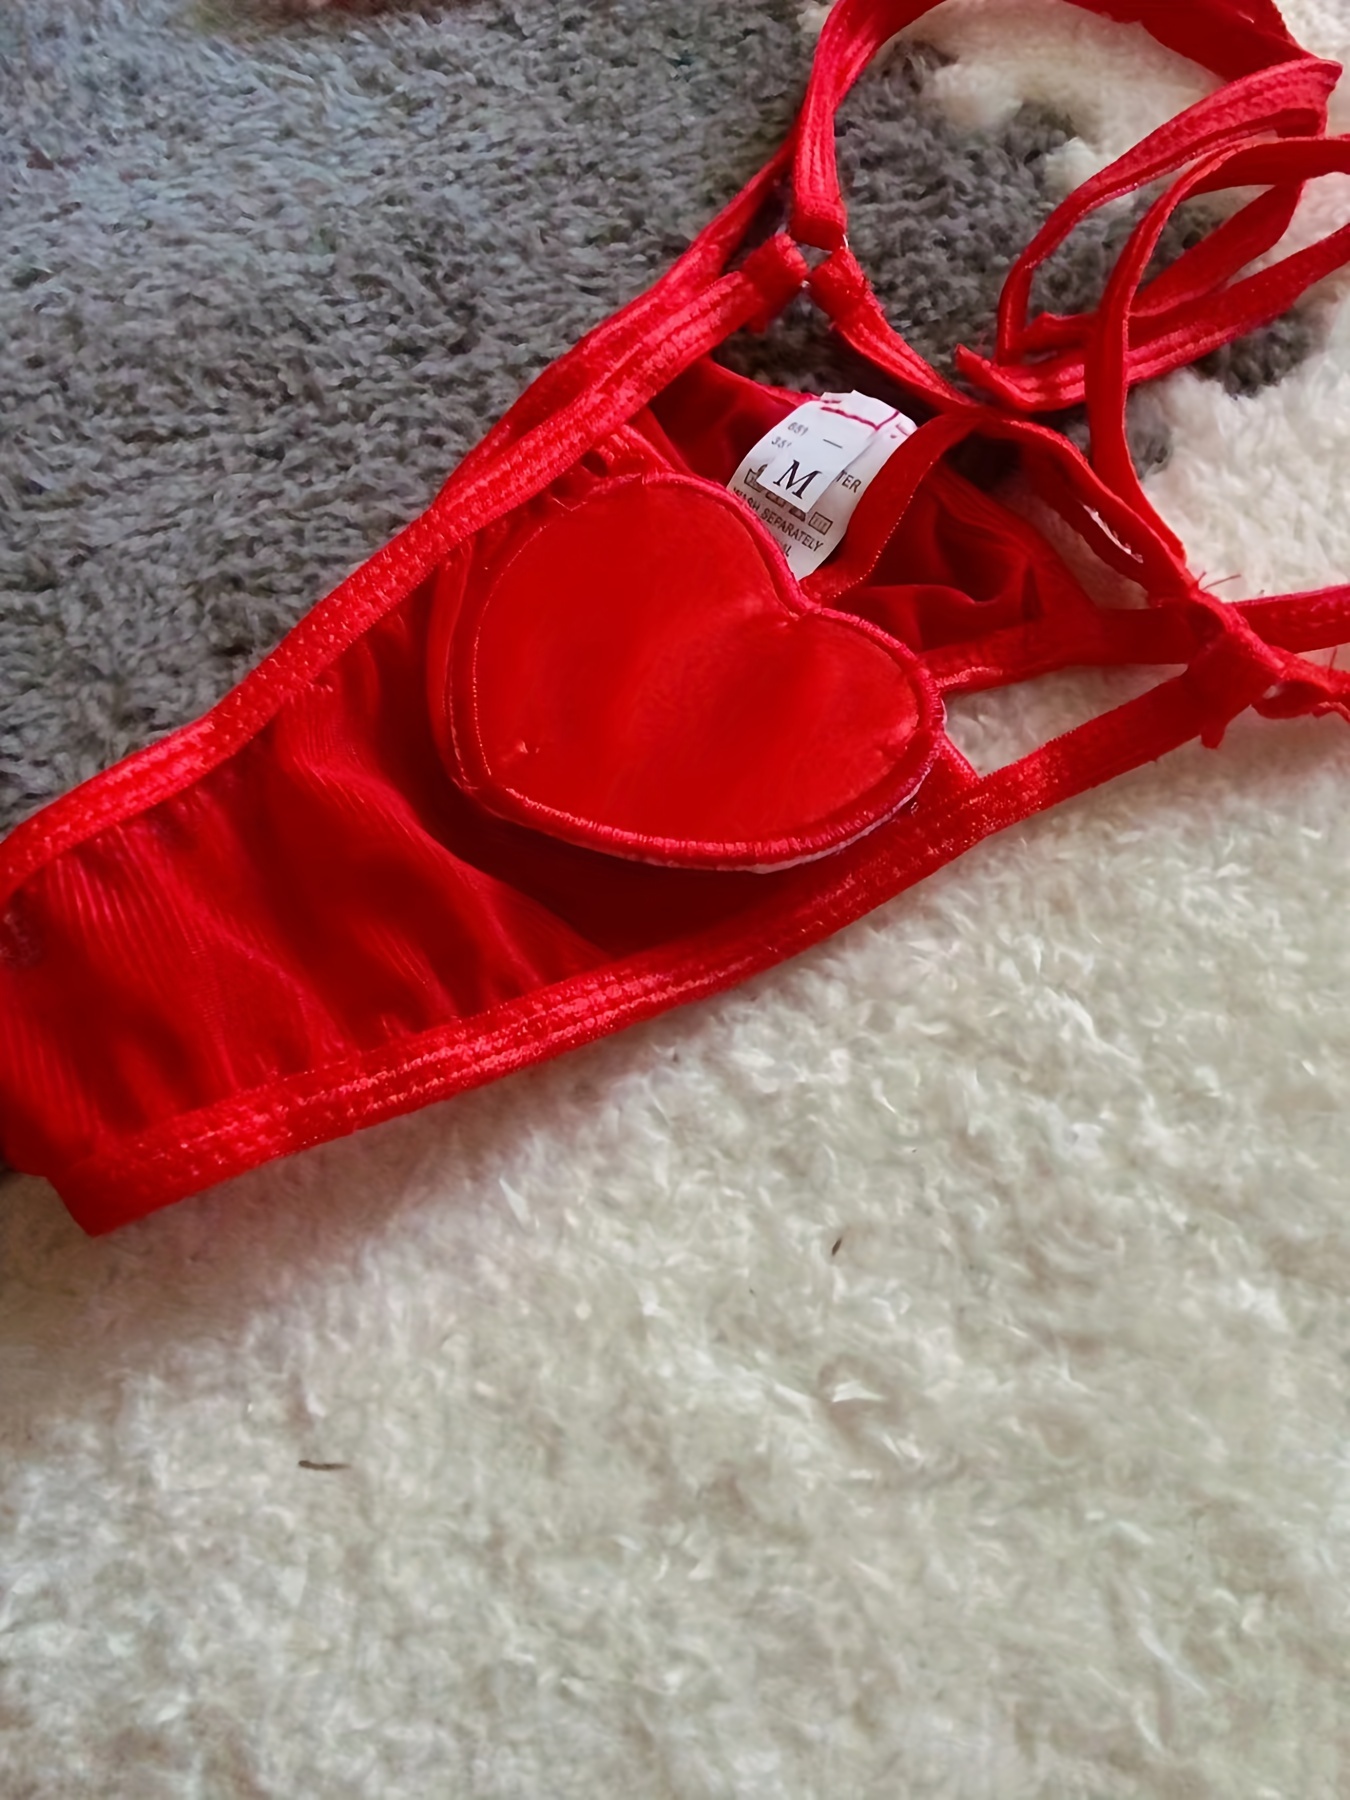 Victoria Secret heart shaped panty. Red, Xs.